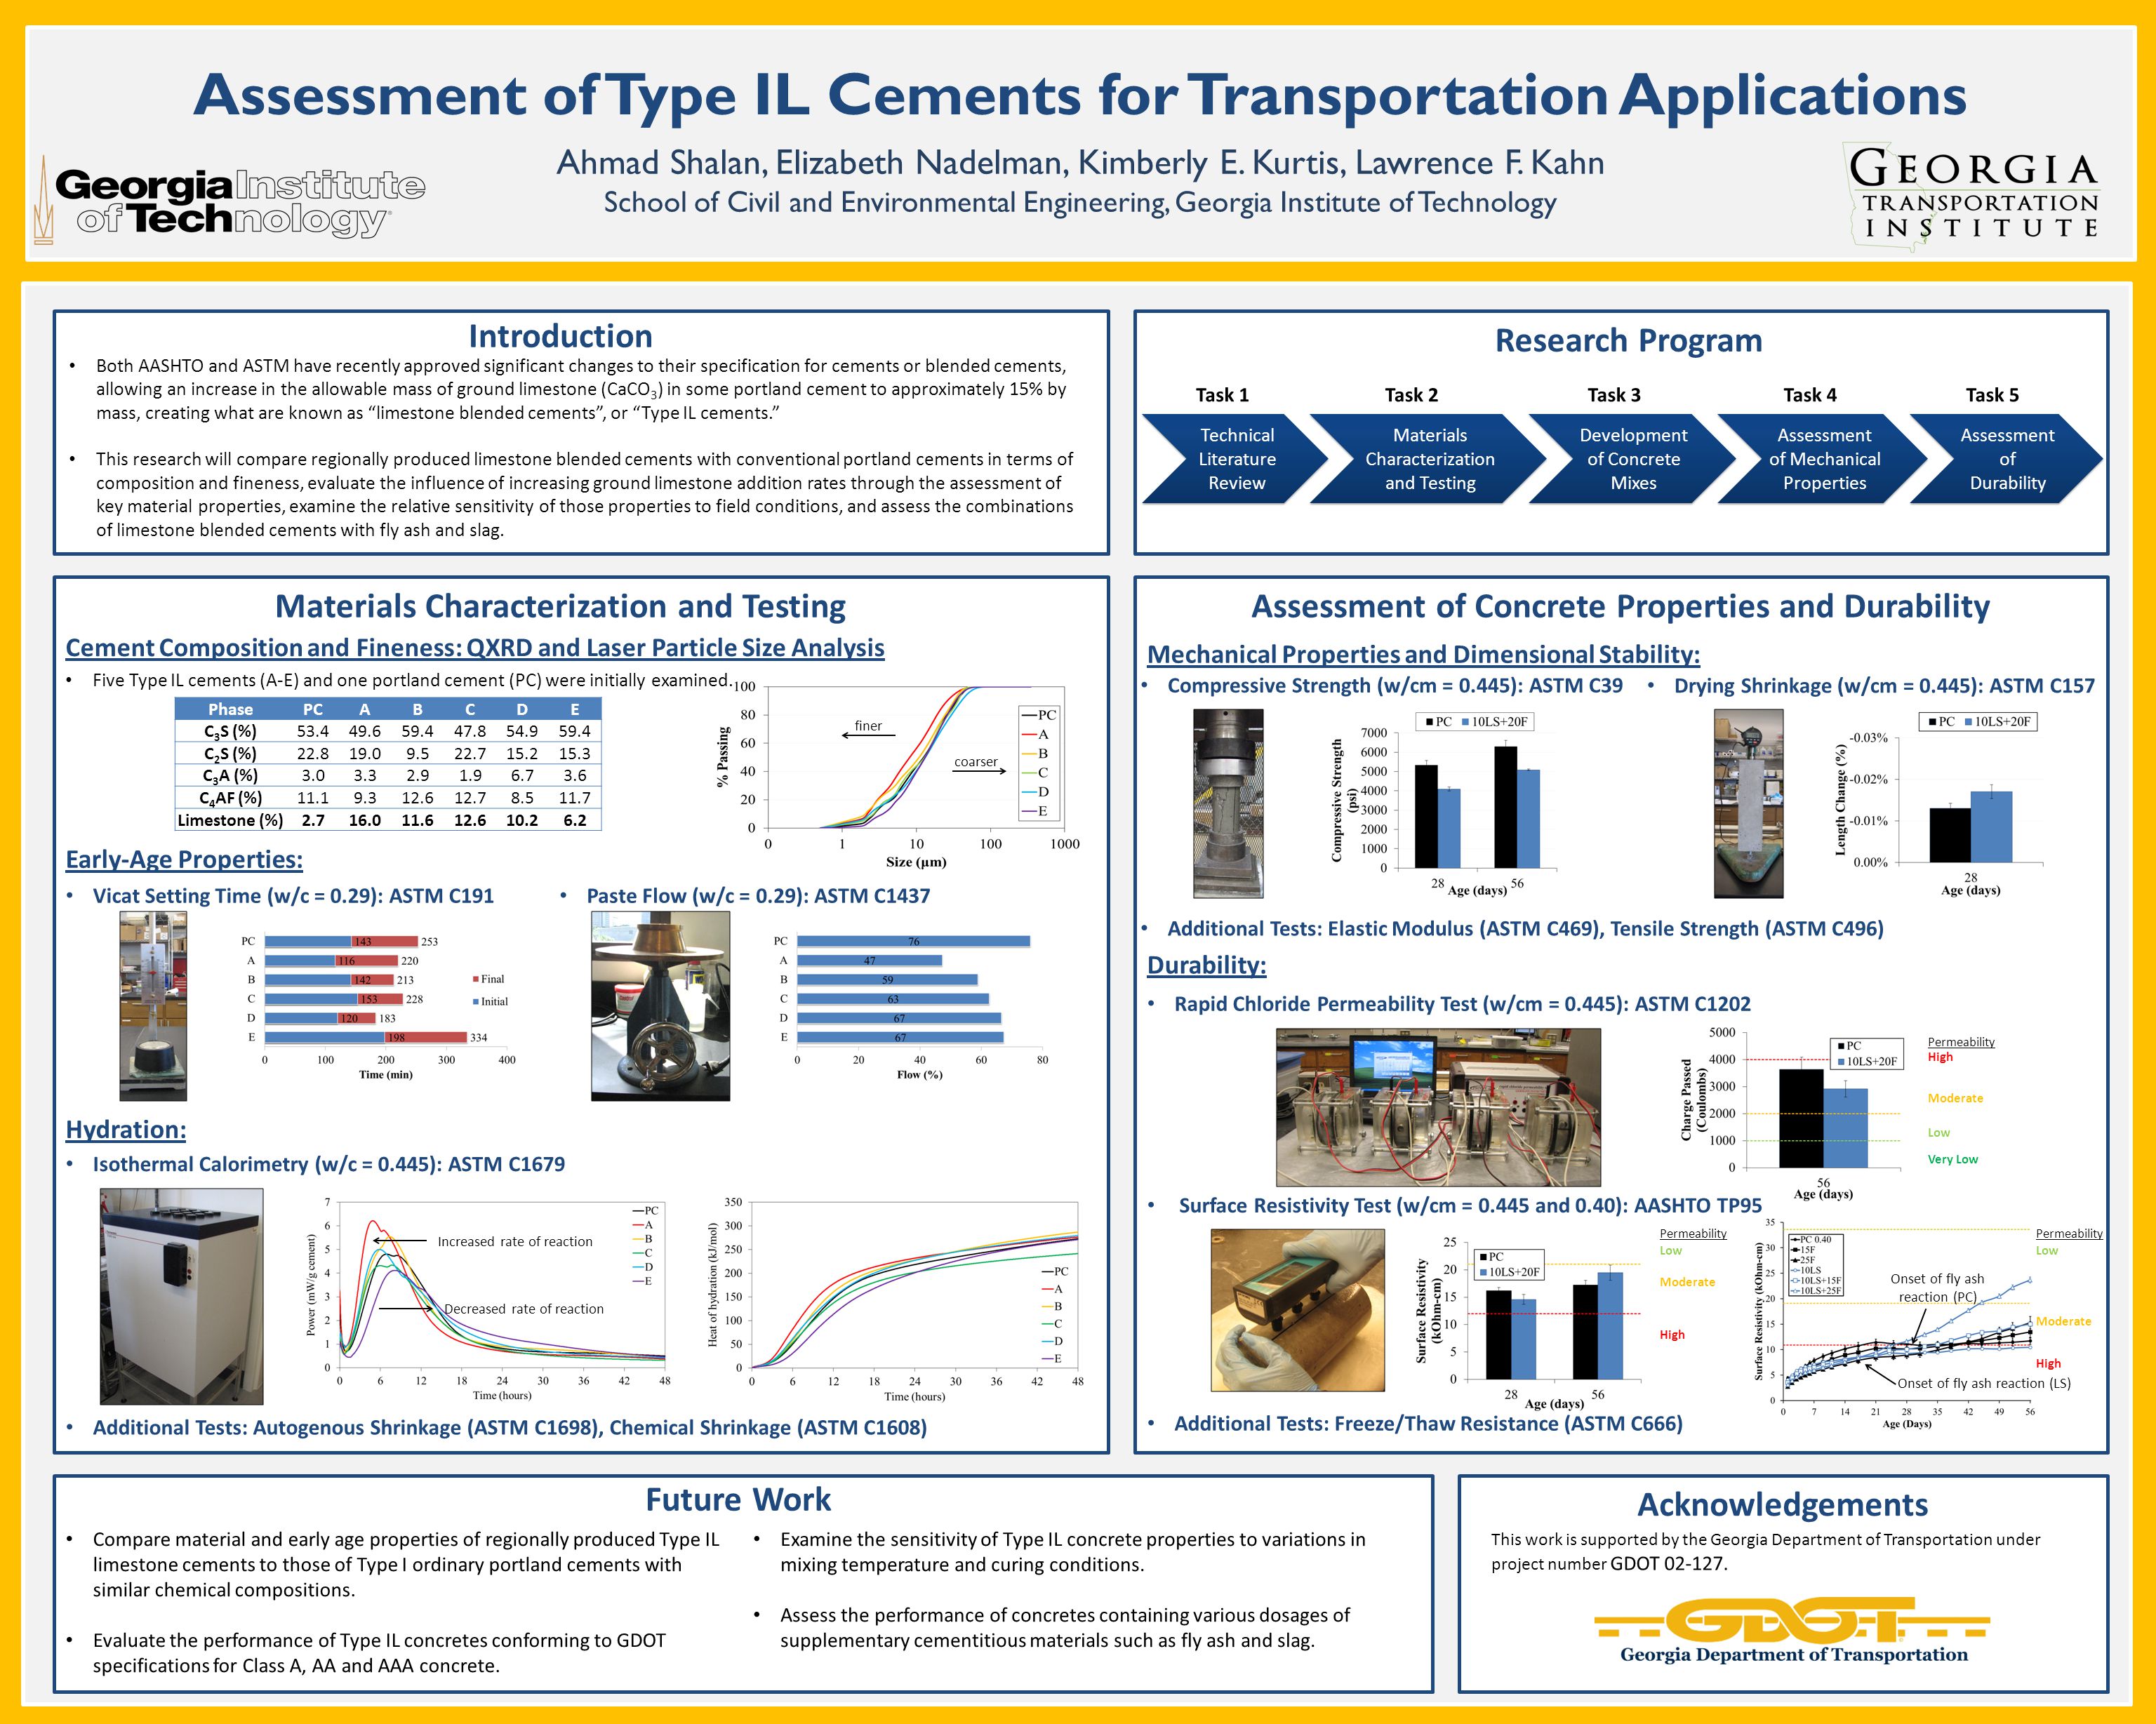 Assessment of Type IL Cements for Transportation Applications Ahmad Shalan, Elizabeth Nadelman, Kimberly E.